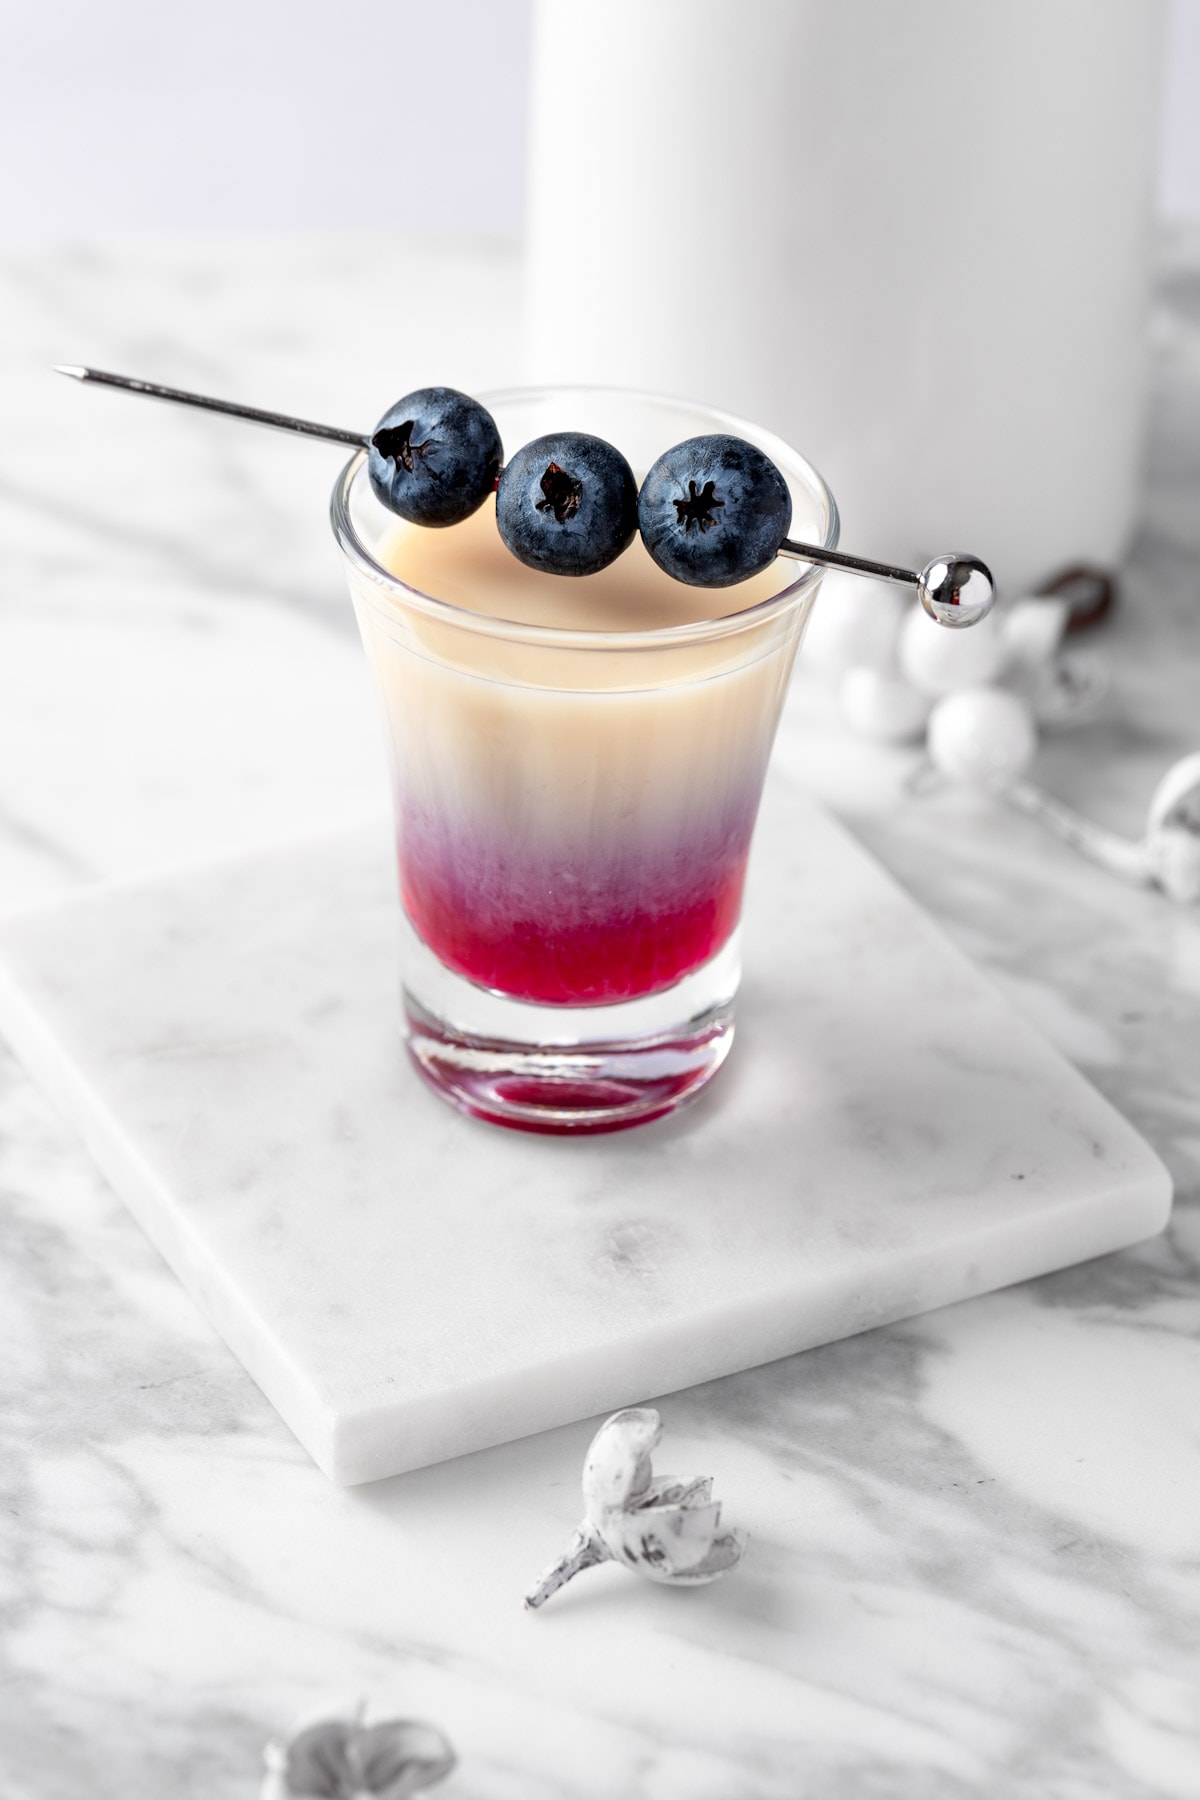 A blueberry muffin shot garnished with 3 blueberries on a white table.